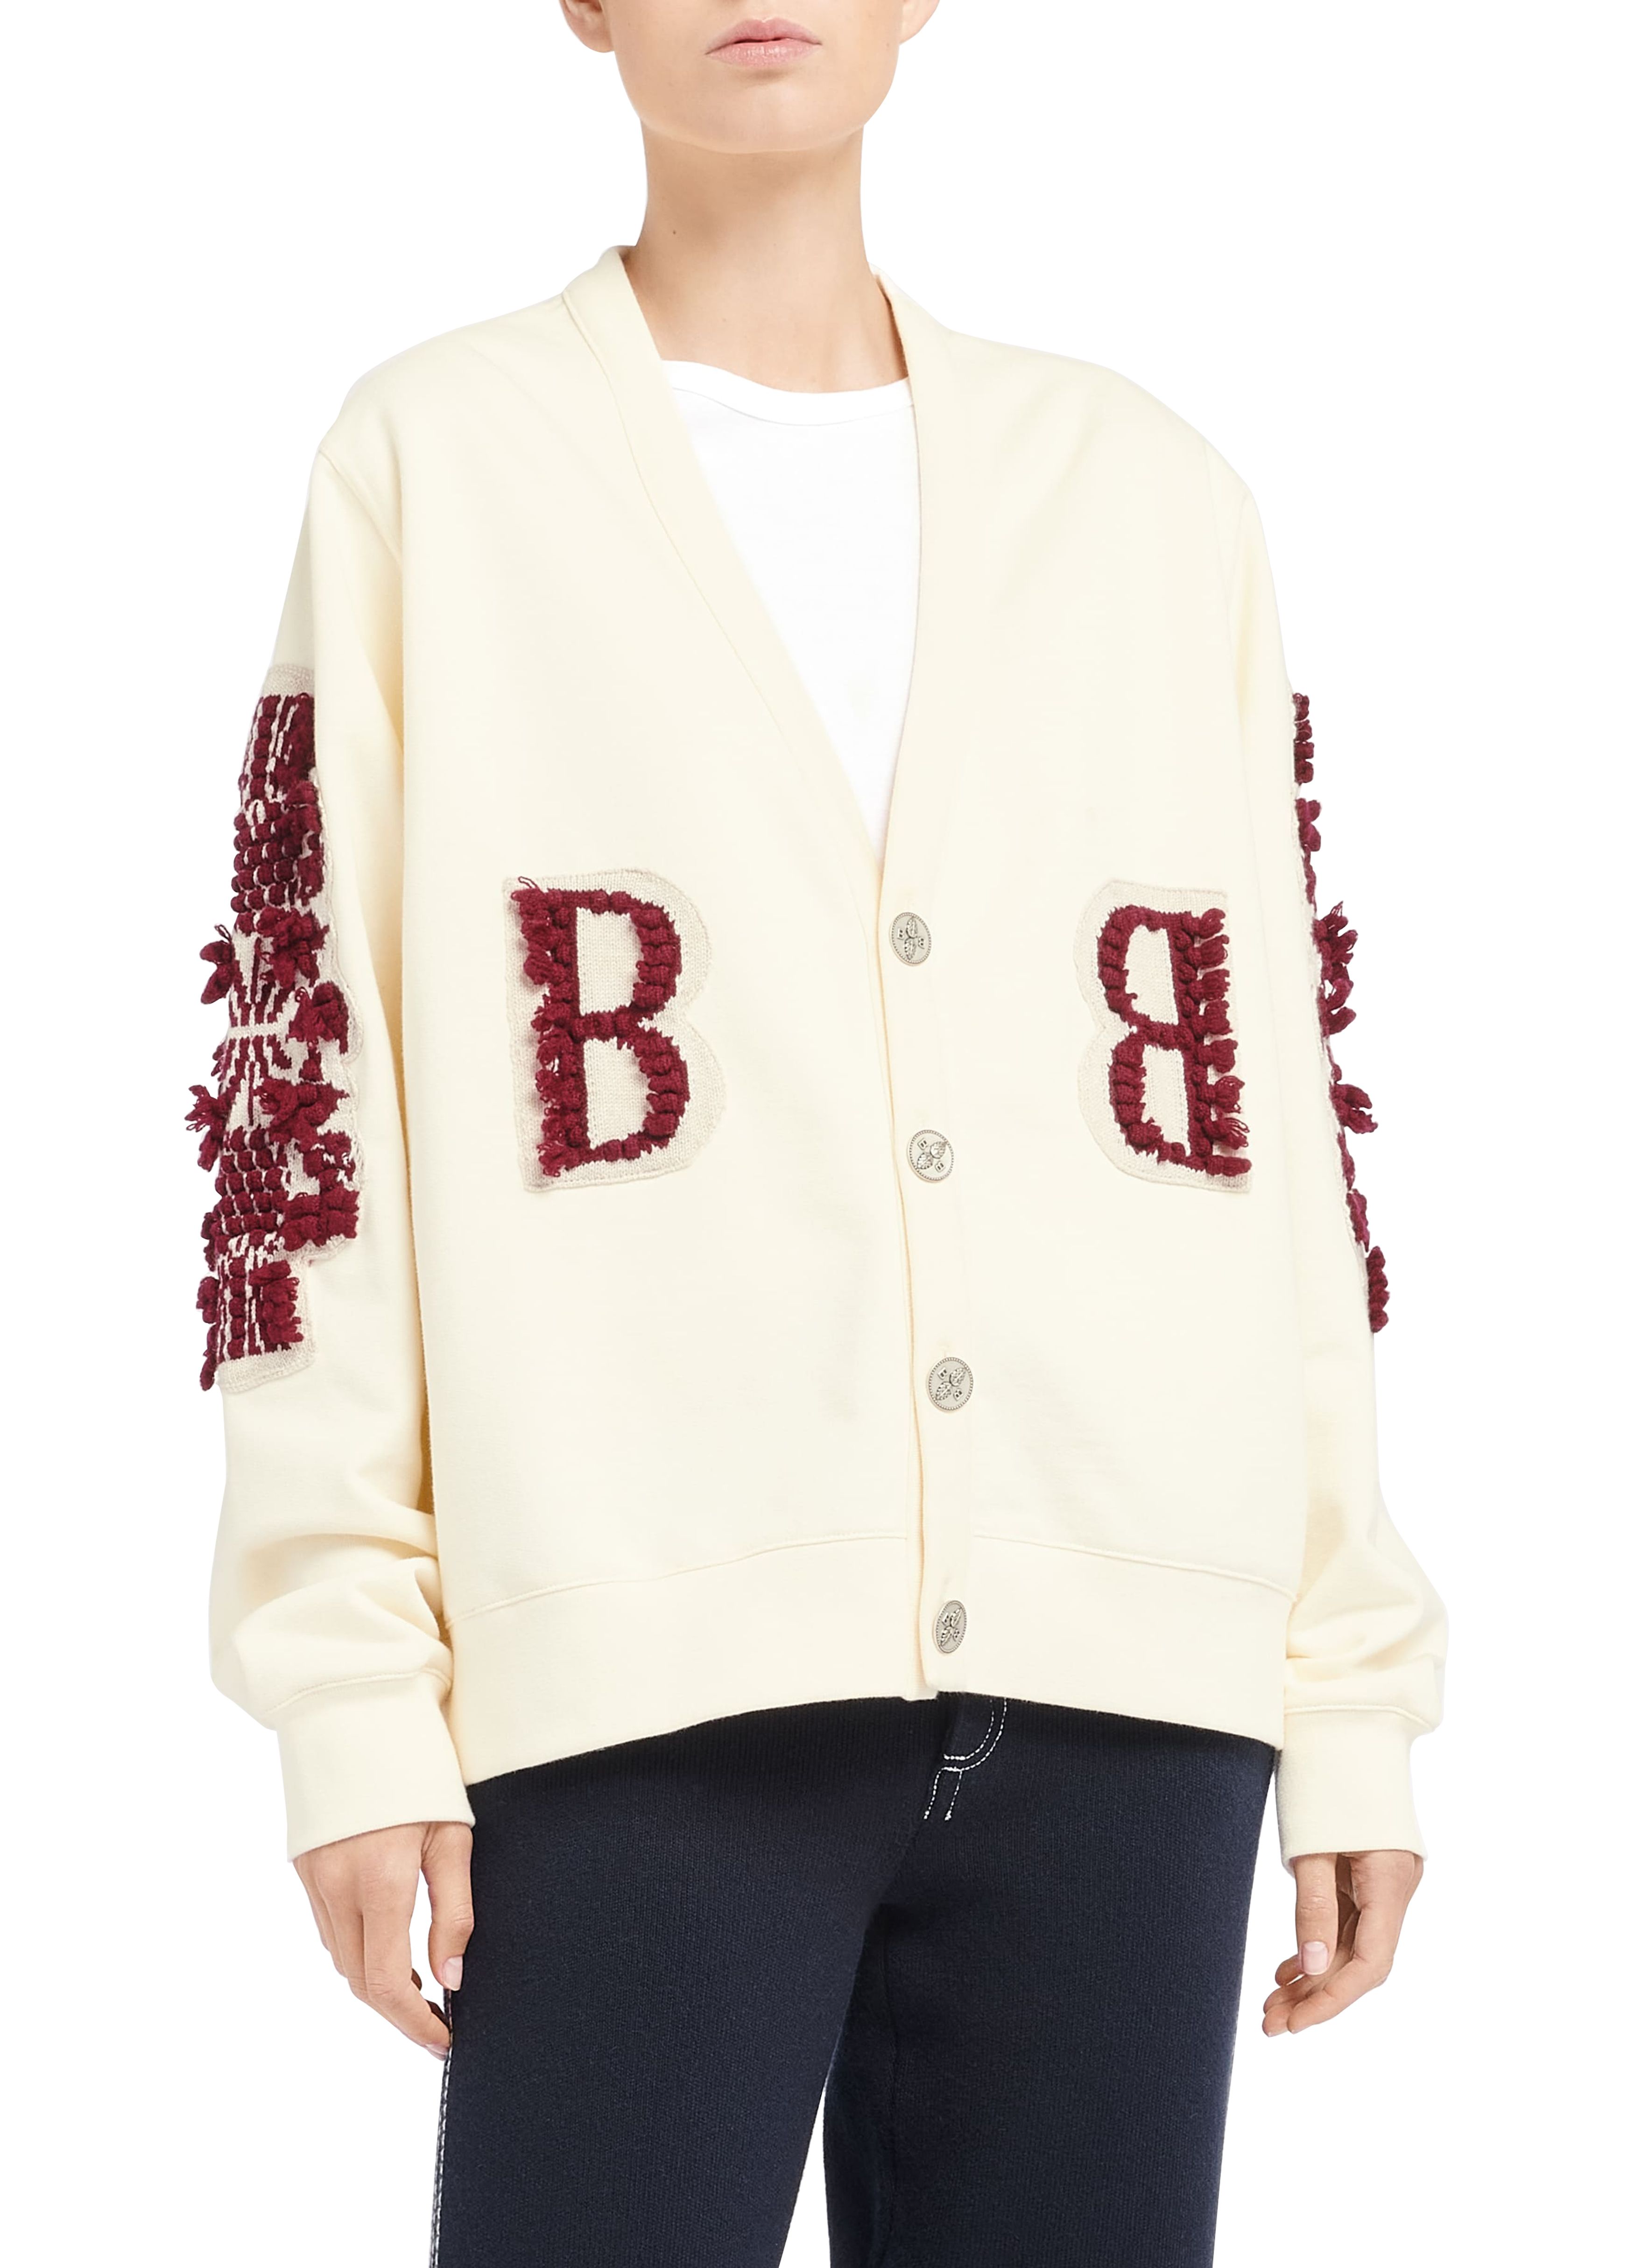 Barrie Cardigan in cotton with a cashmere B logo